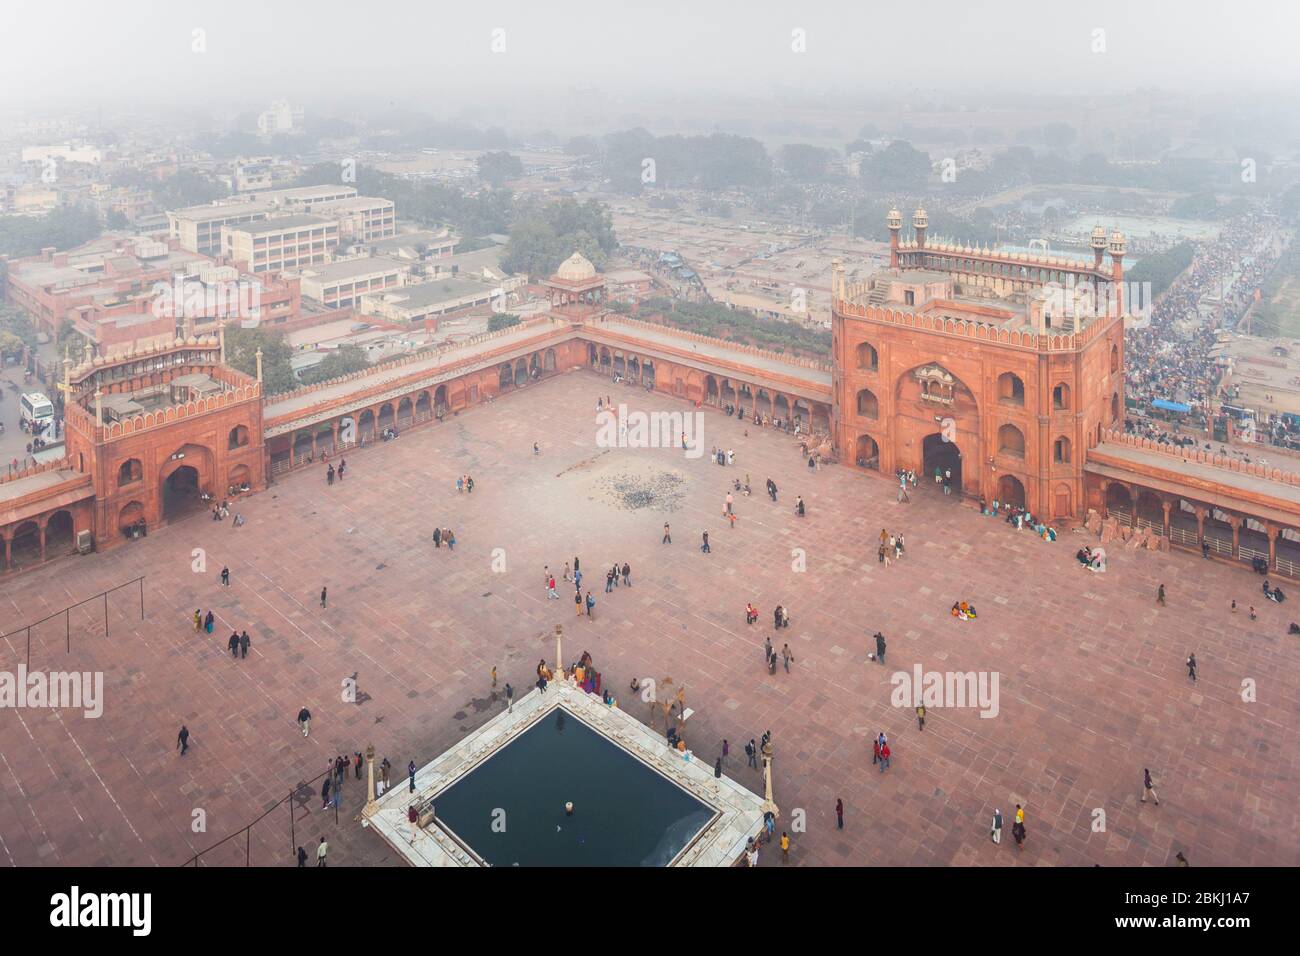 India, National Capital Territory of Delhi, Old Delhi, Jama Masjid Mosque built by Mughal emperor Shah Jahan in 1656, elevated view on the esplanade, the basin and the city from a minaret Stock Photo